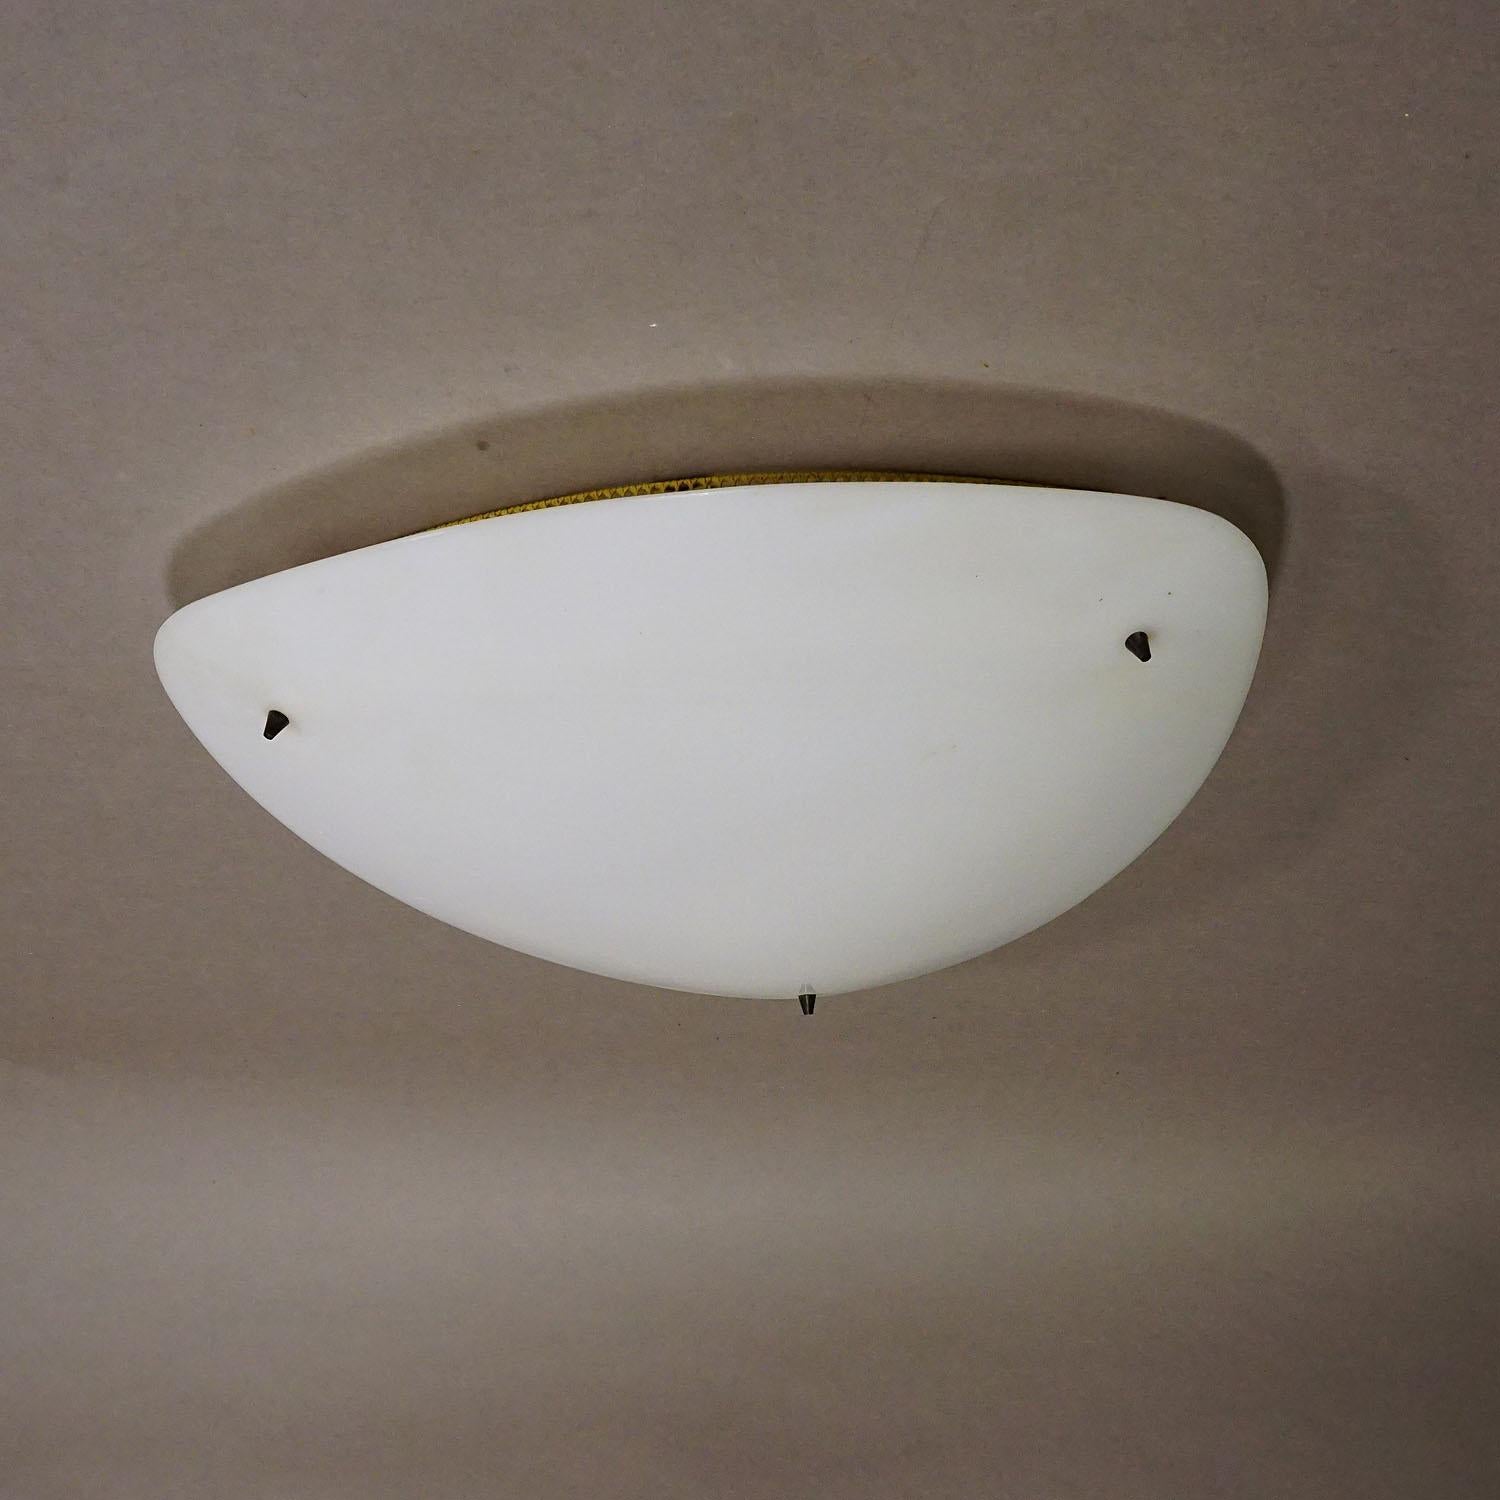 Space Age Ceilling Lamp by Tele-Ambiance 1960s, France

This vintage spage age lamp is a true eye-catcher for your 60s furnishing. It was made by the French company Télé-Ambiance in the 1960s and produced in different sizes as ceiling fixture, wall